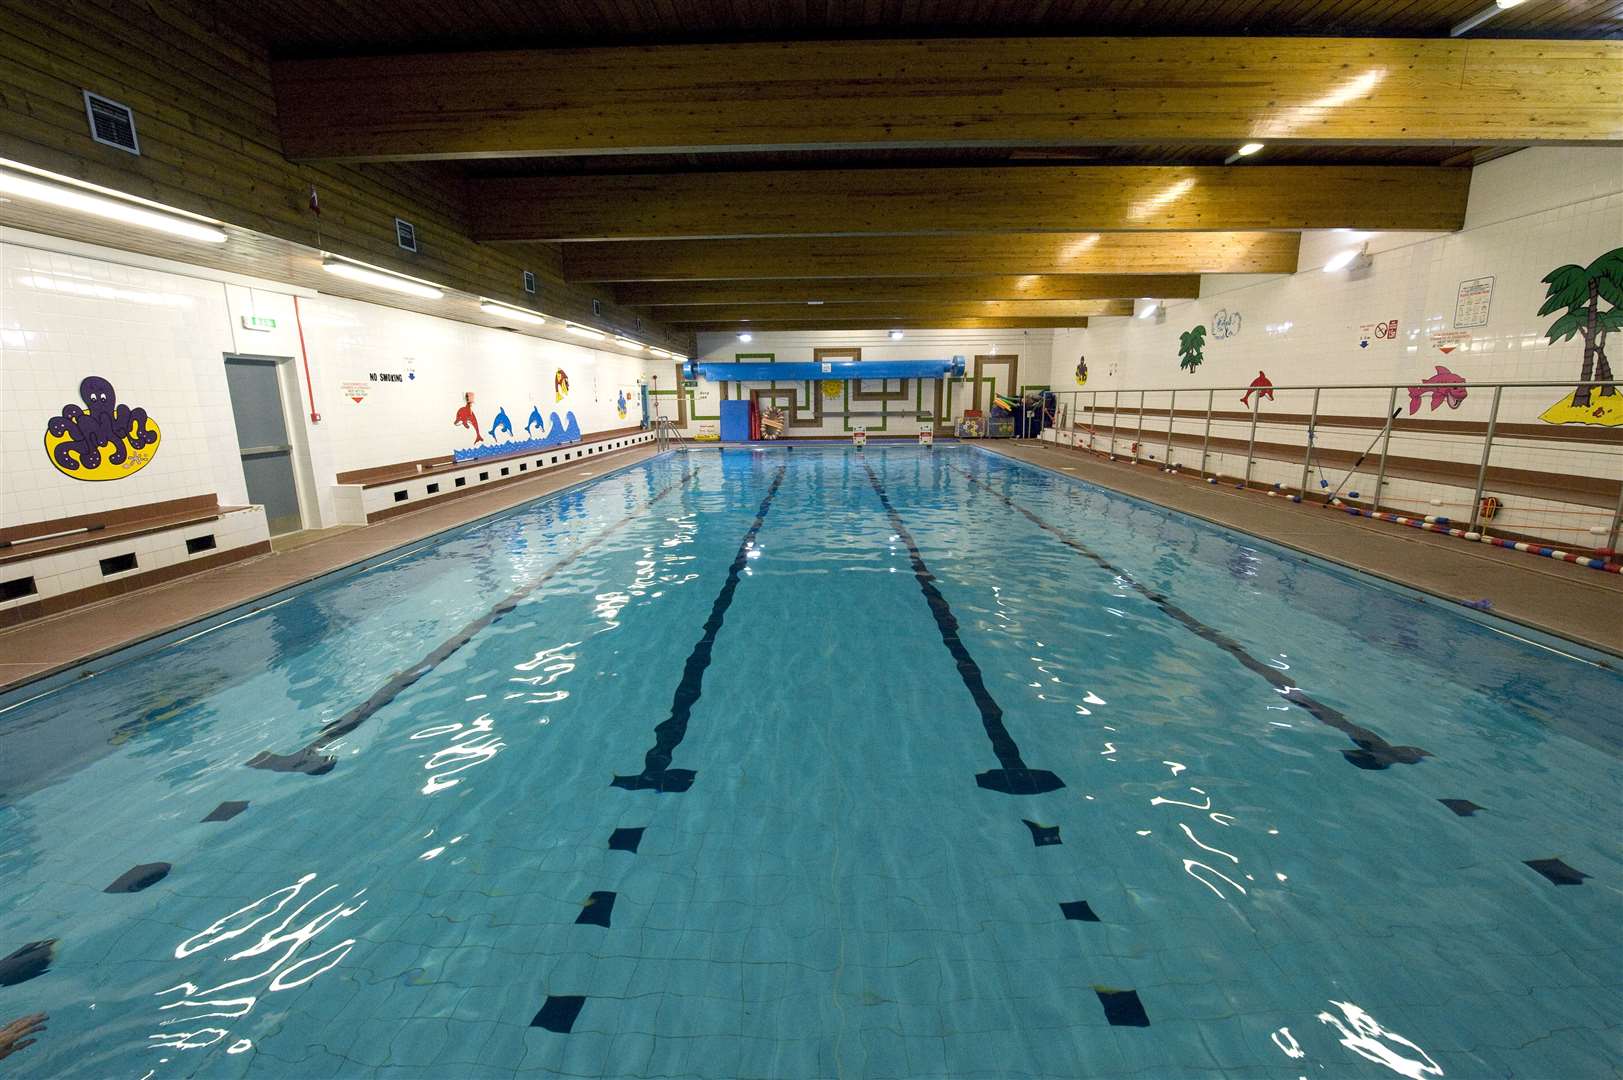 Sites such as Turriff Swimming Pool need organisations and clubs to come forward to make use of the facilities.